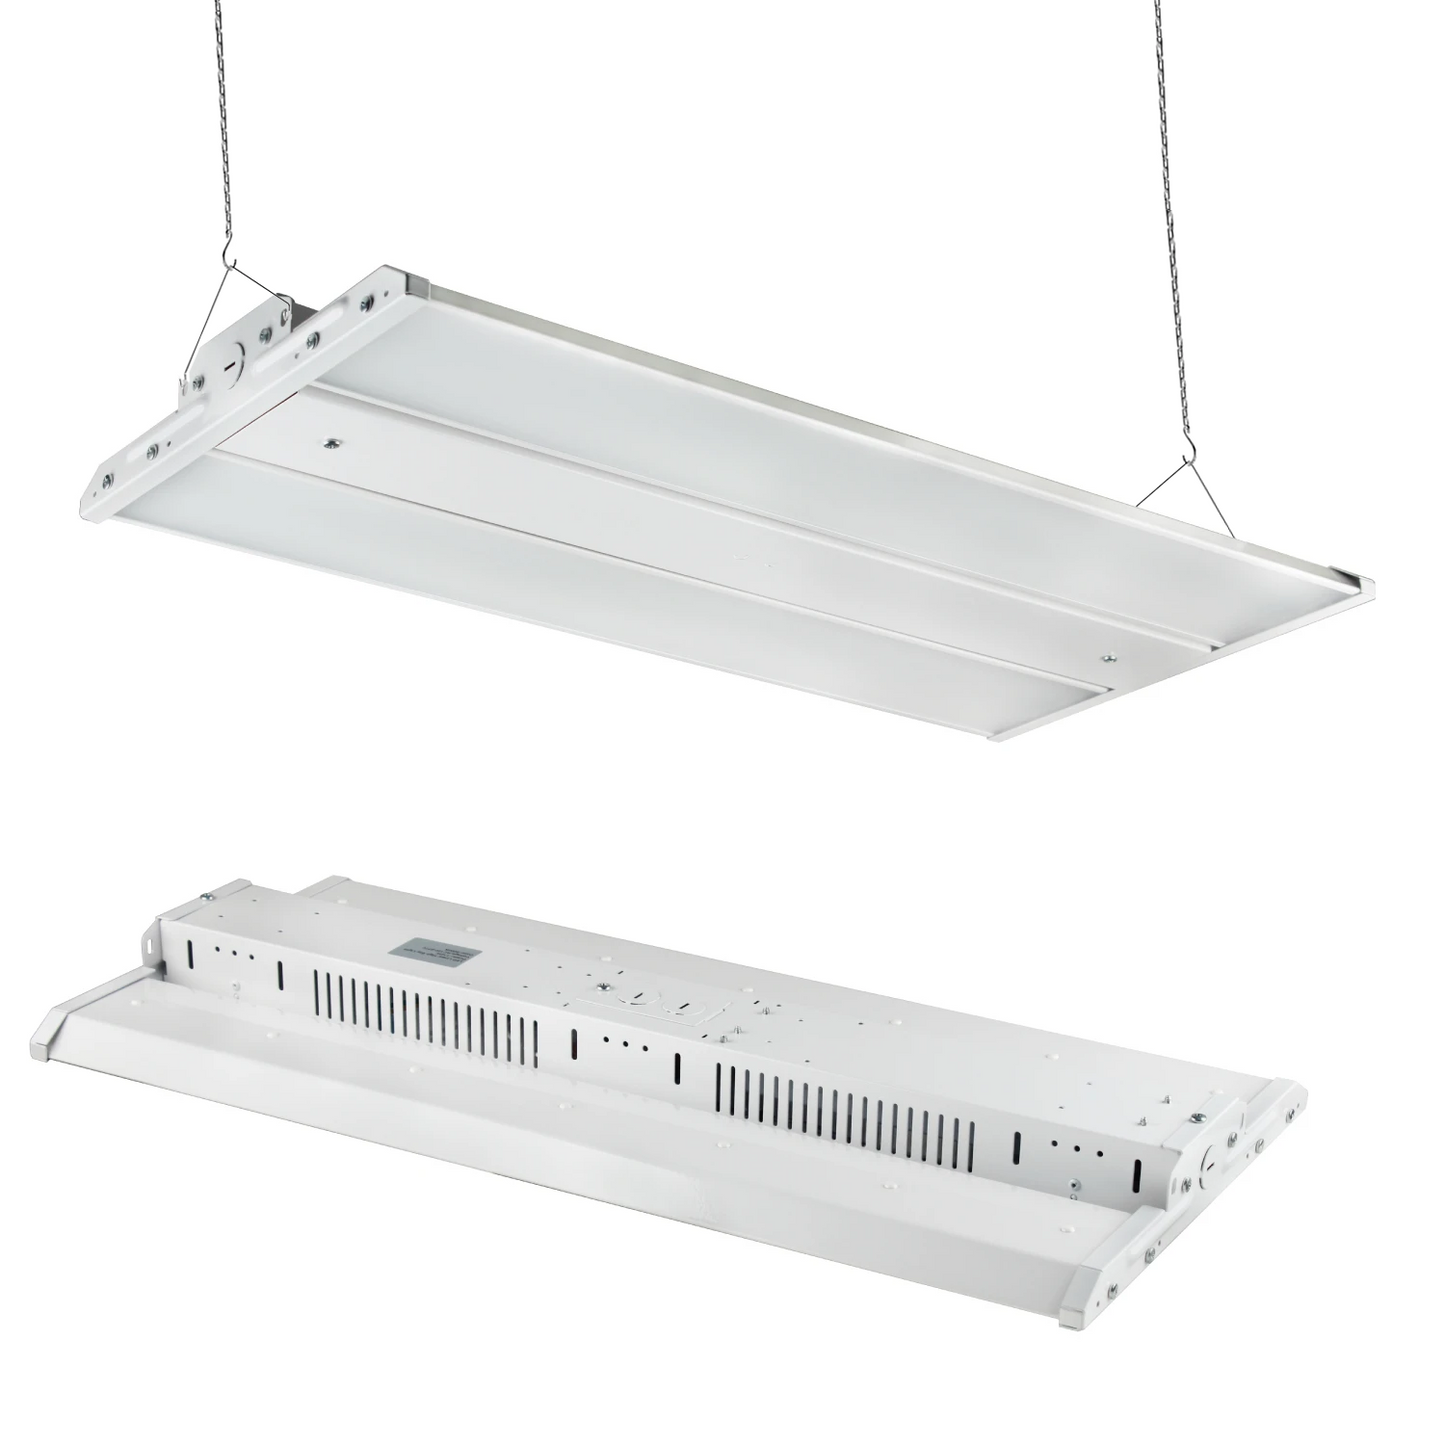 2FT LED Linear High Bay Light, 165W, 5700K, 22500LM, 120-277VAC, Linear Hanging Light For Warehouse, Factory, and Workshop